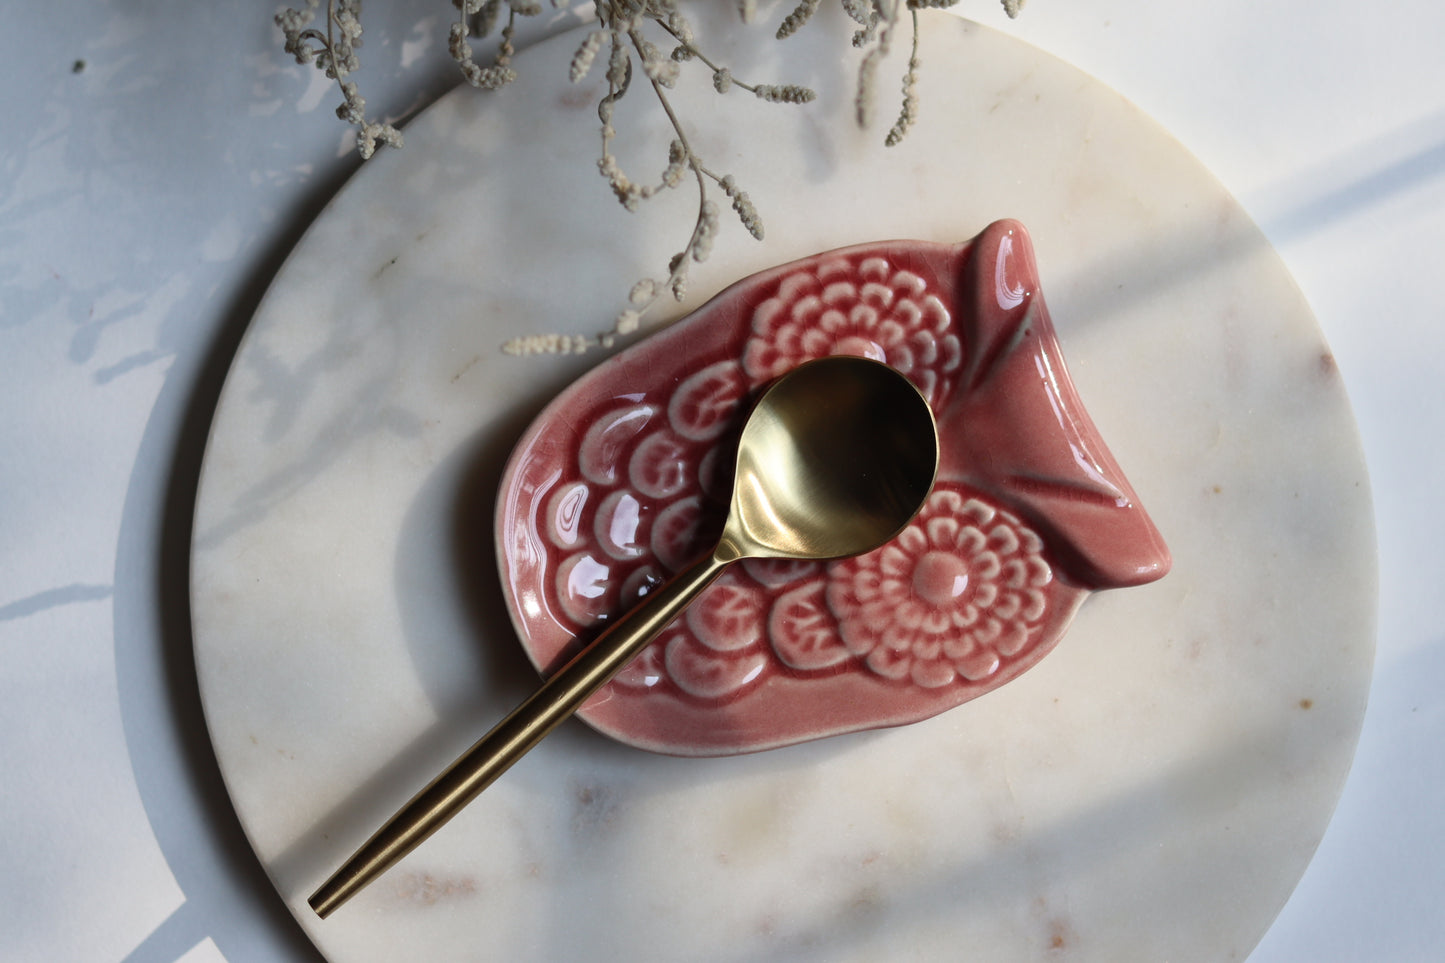 Owl Spoon Rest - Pink